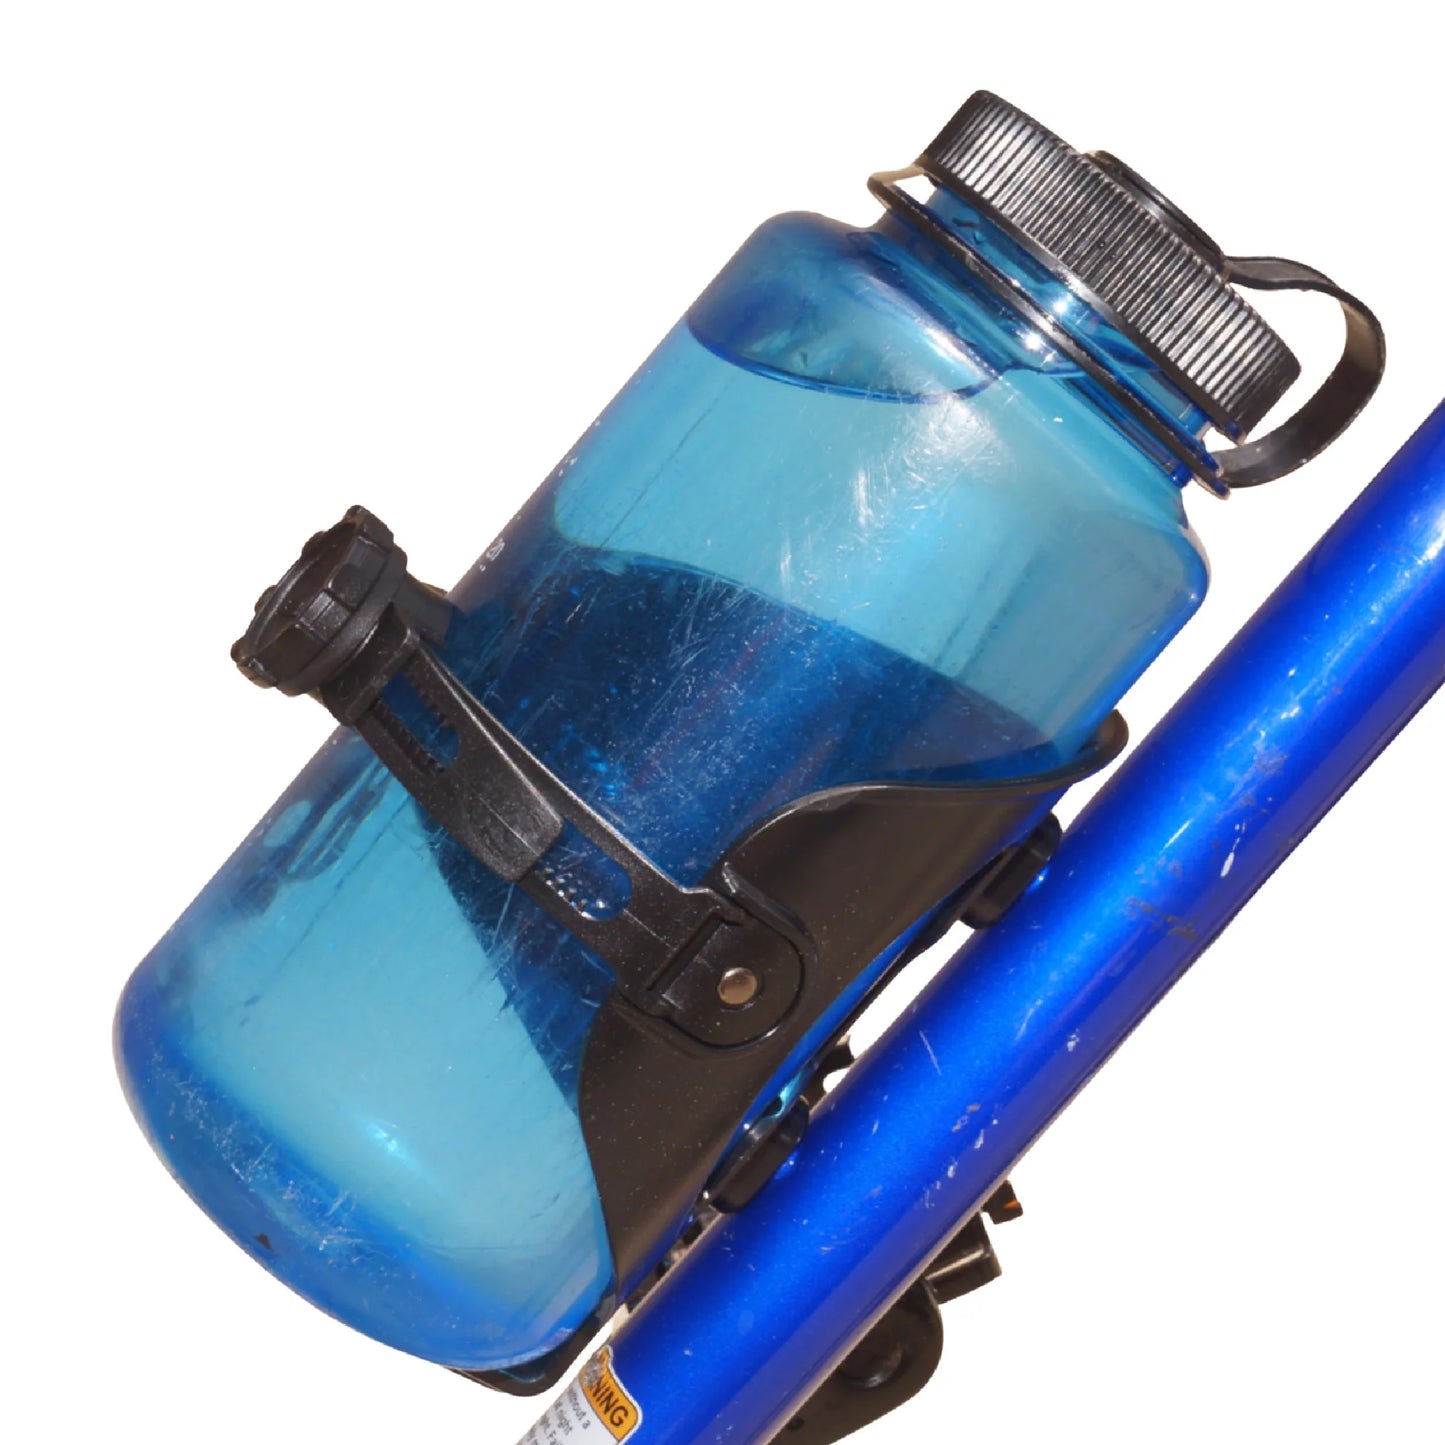 ABC Bottle Cage for Ebikes Standalone: The BEST Water Bottle Cage for Ebikes